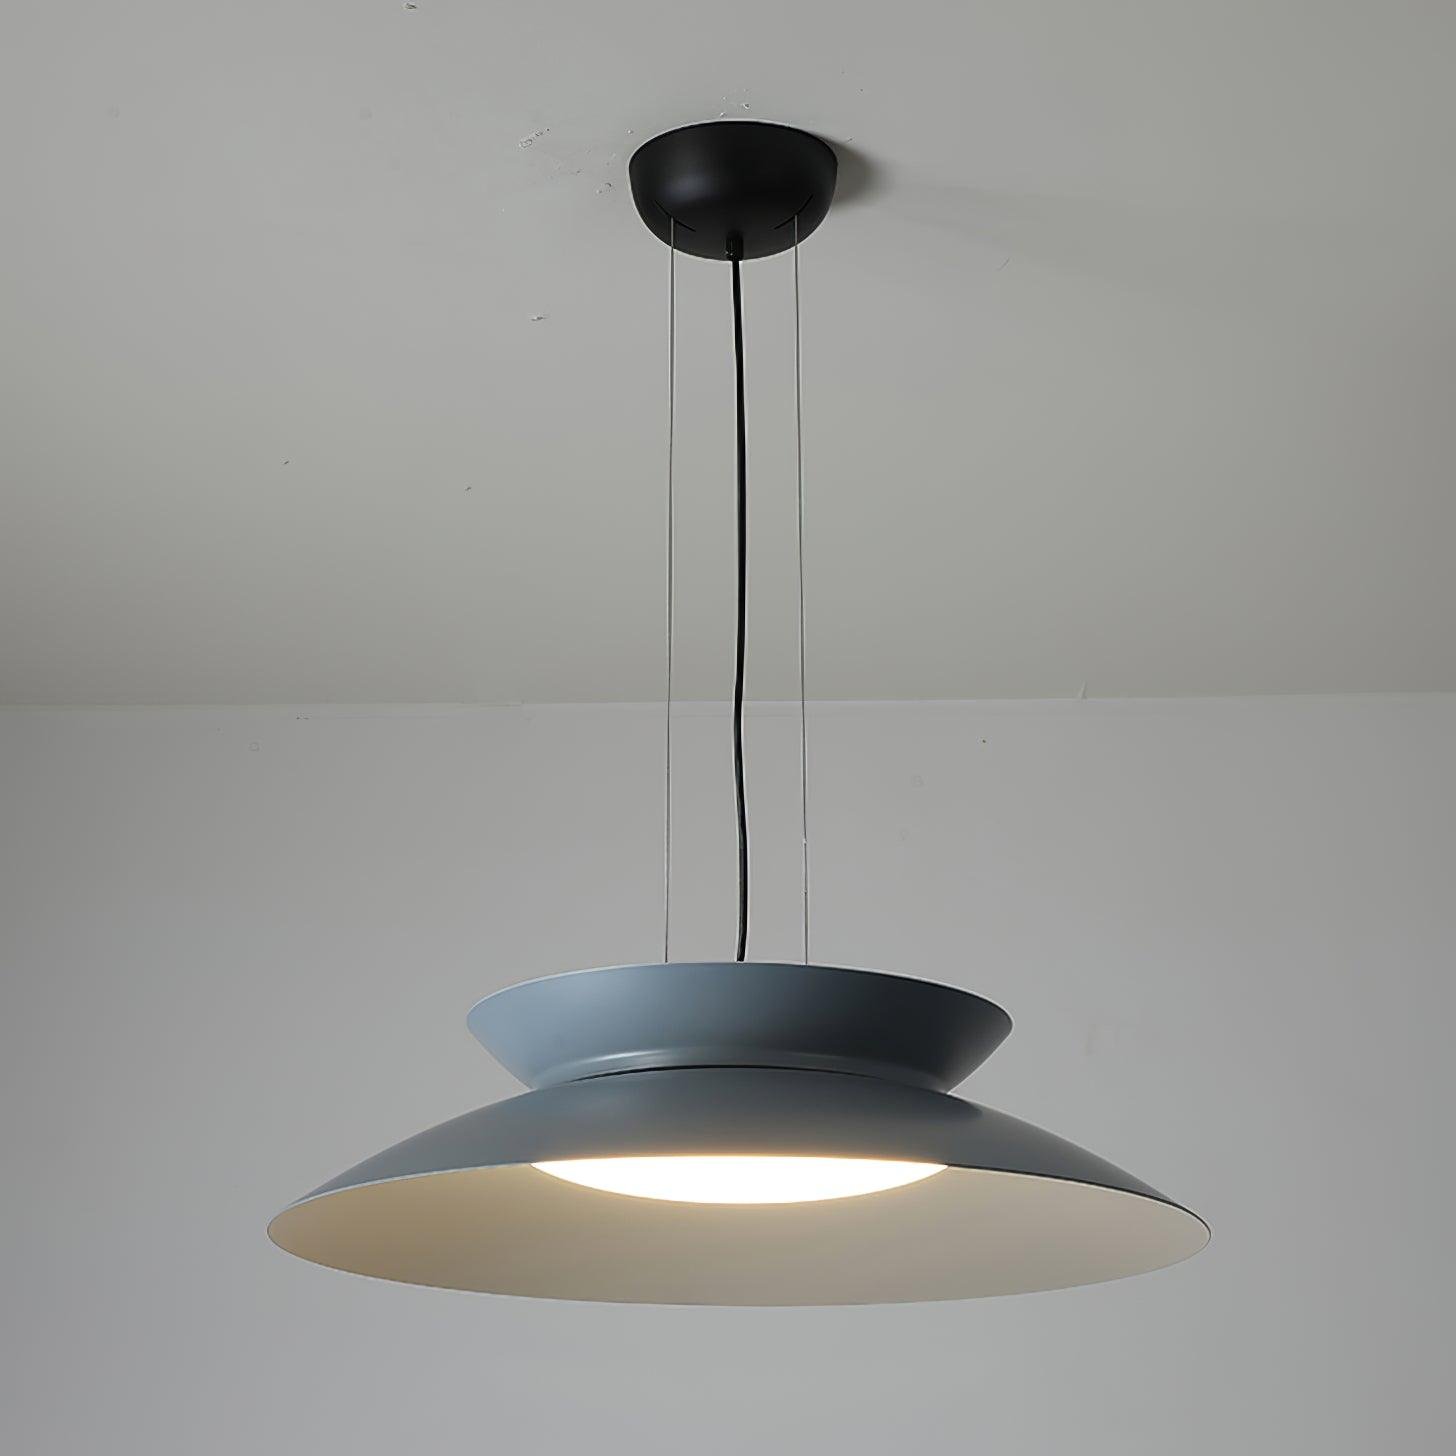 Cetra Pendant Light in Grey Blue, 26.8 inch (68cm) Diameter, 6.5 inch (16.5cm) Height, Cool Light Emission.